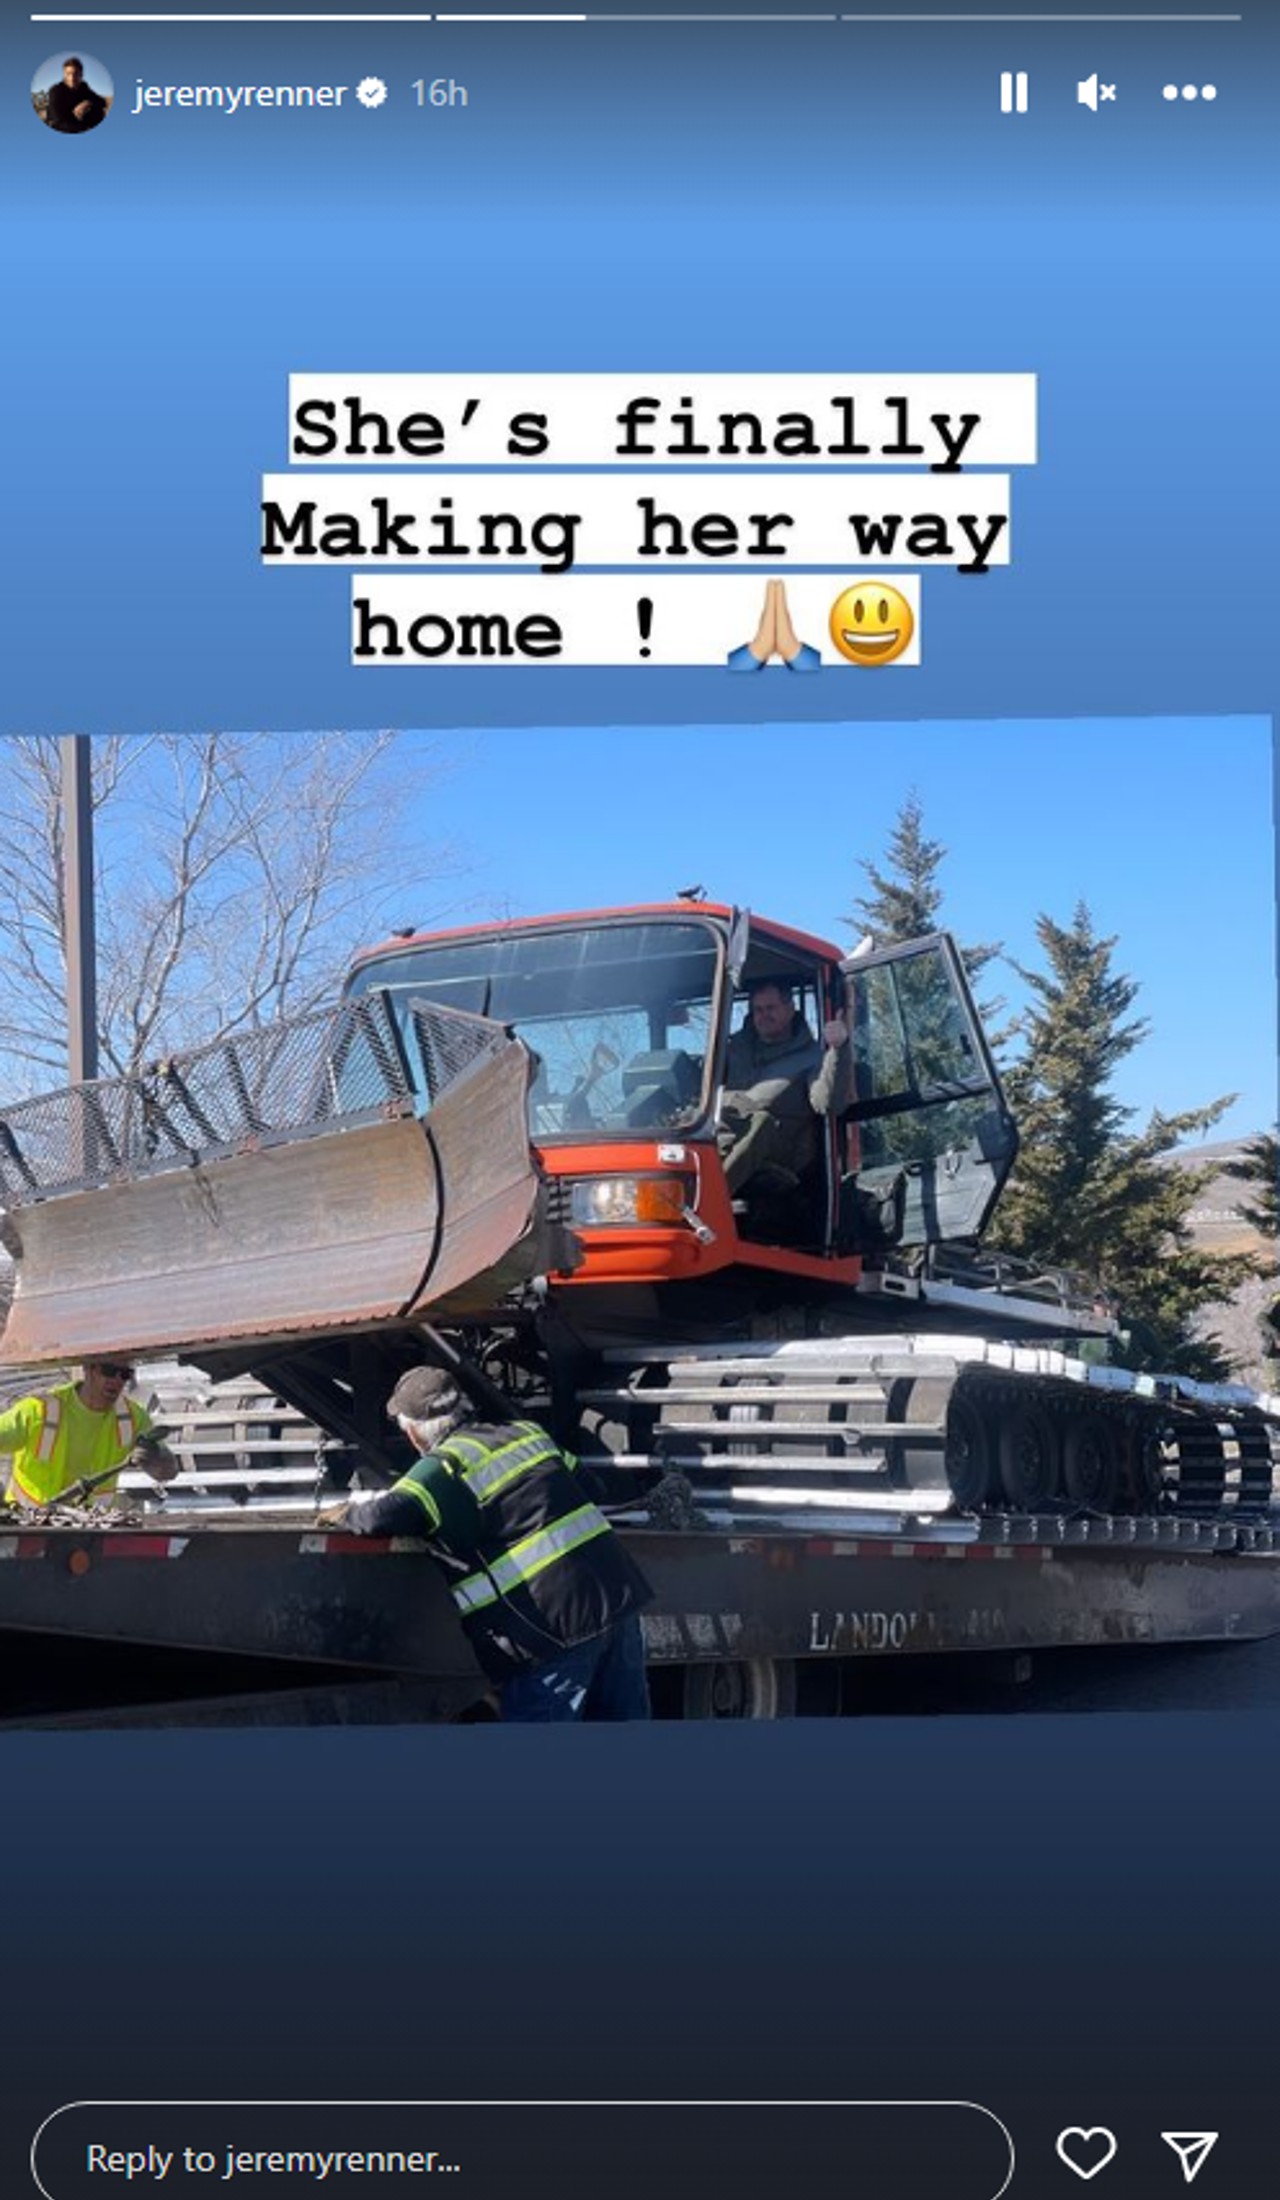 Jeremy Renner's snowplow "making her way home!"